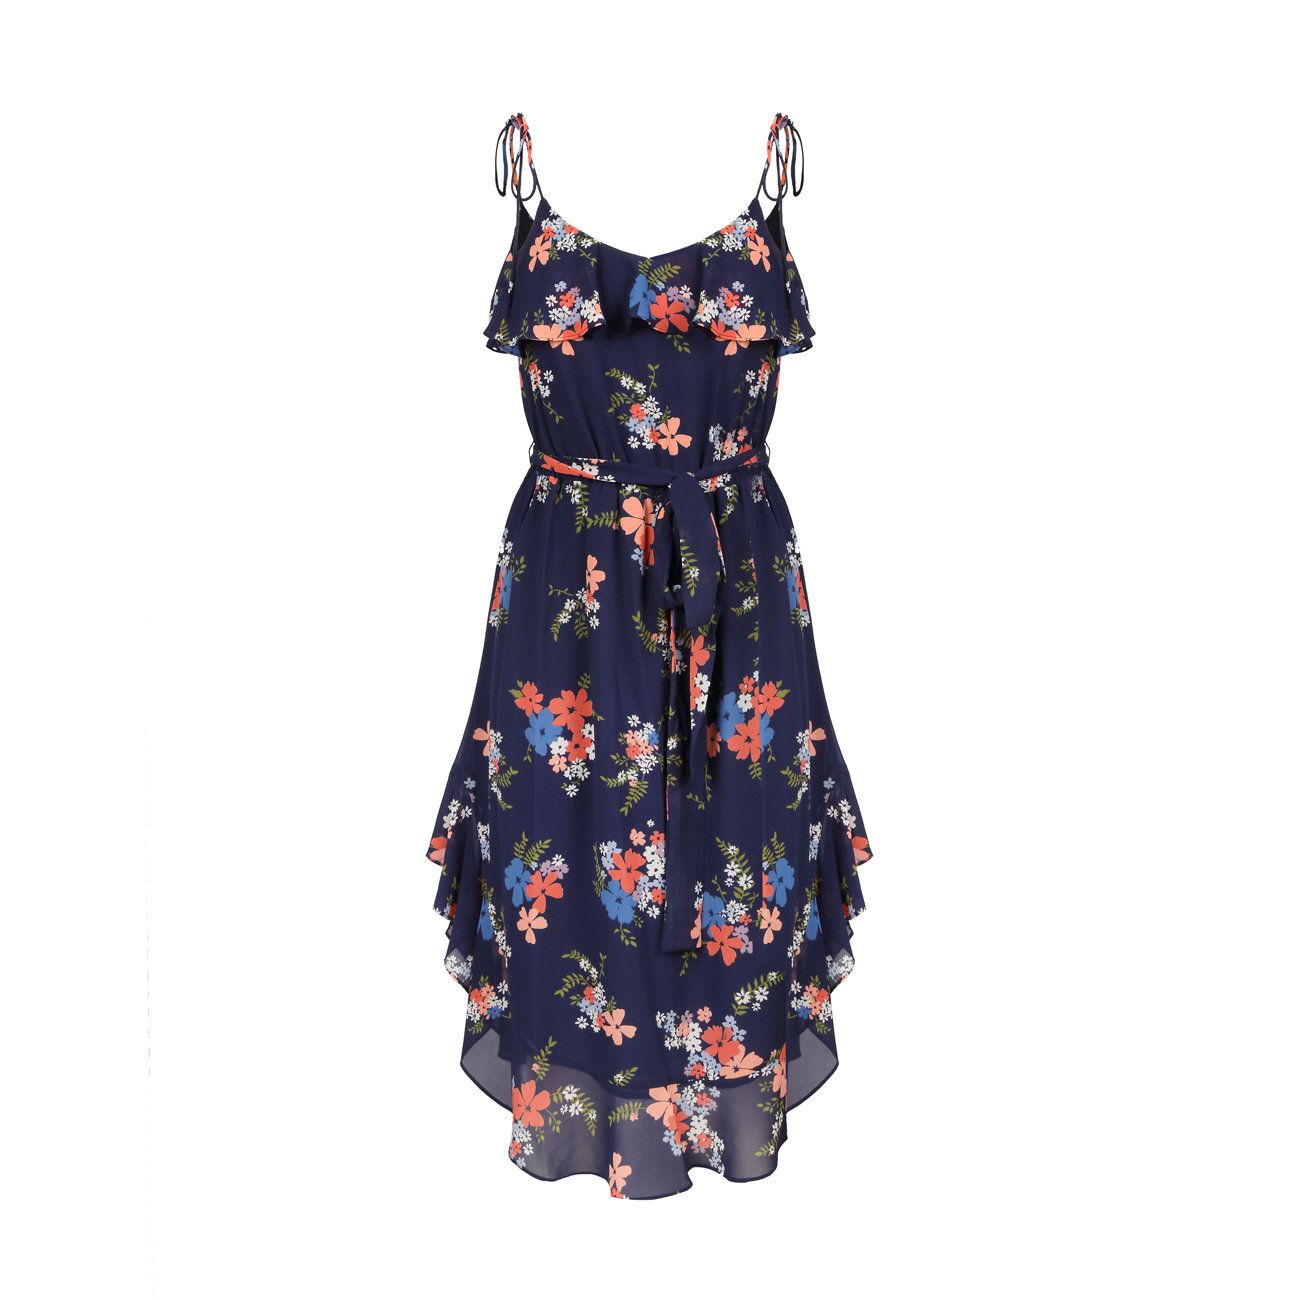 MICHAEL KORS FLORAL DRESS WITH VOLANT ...